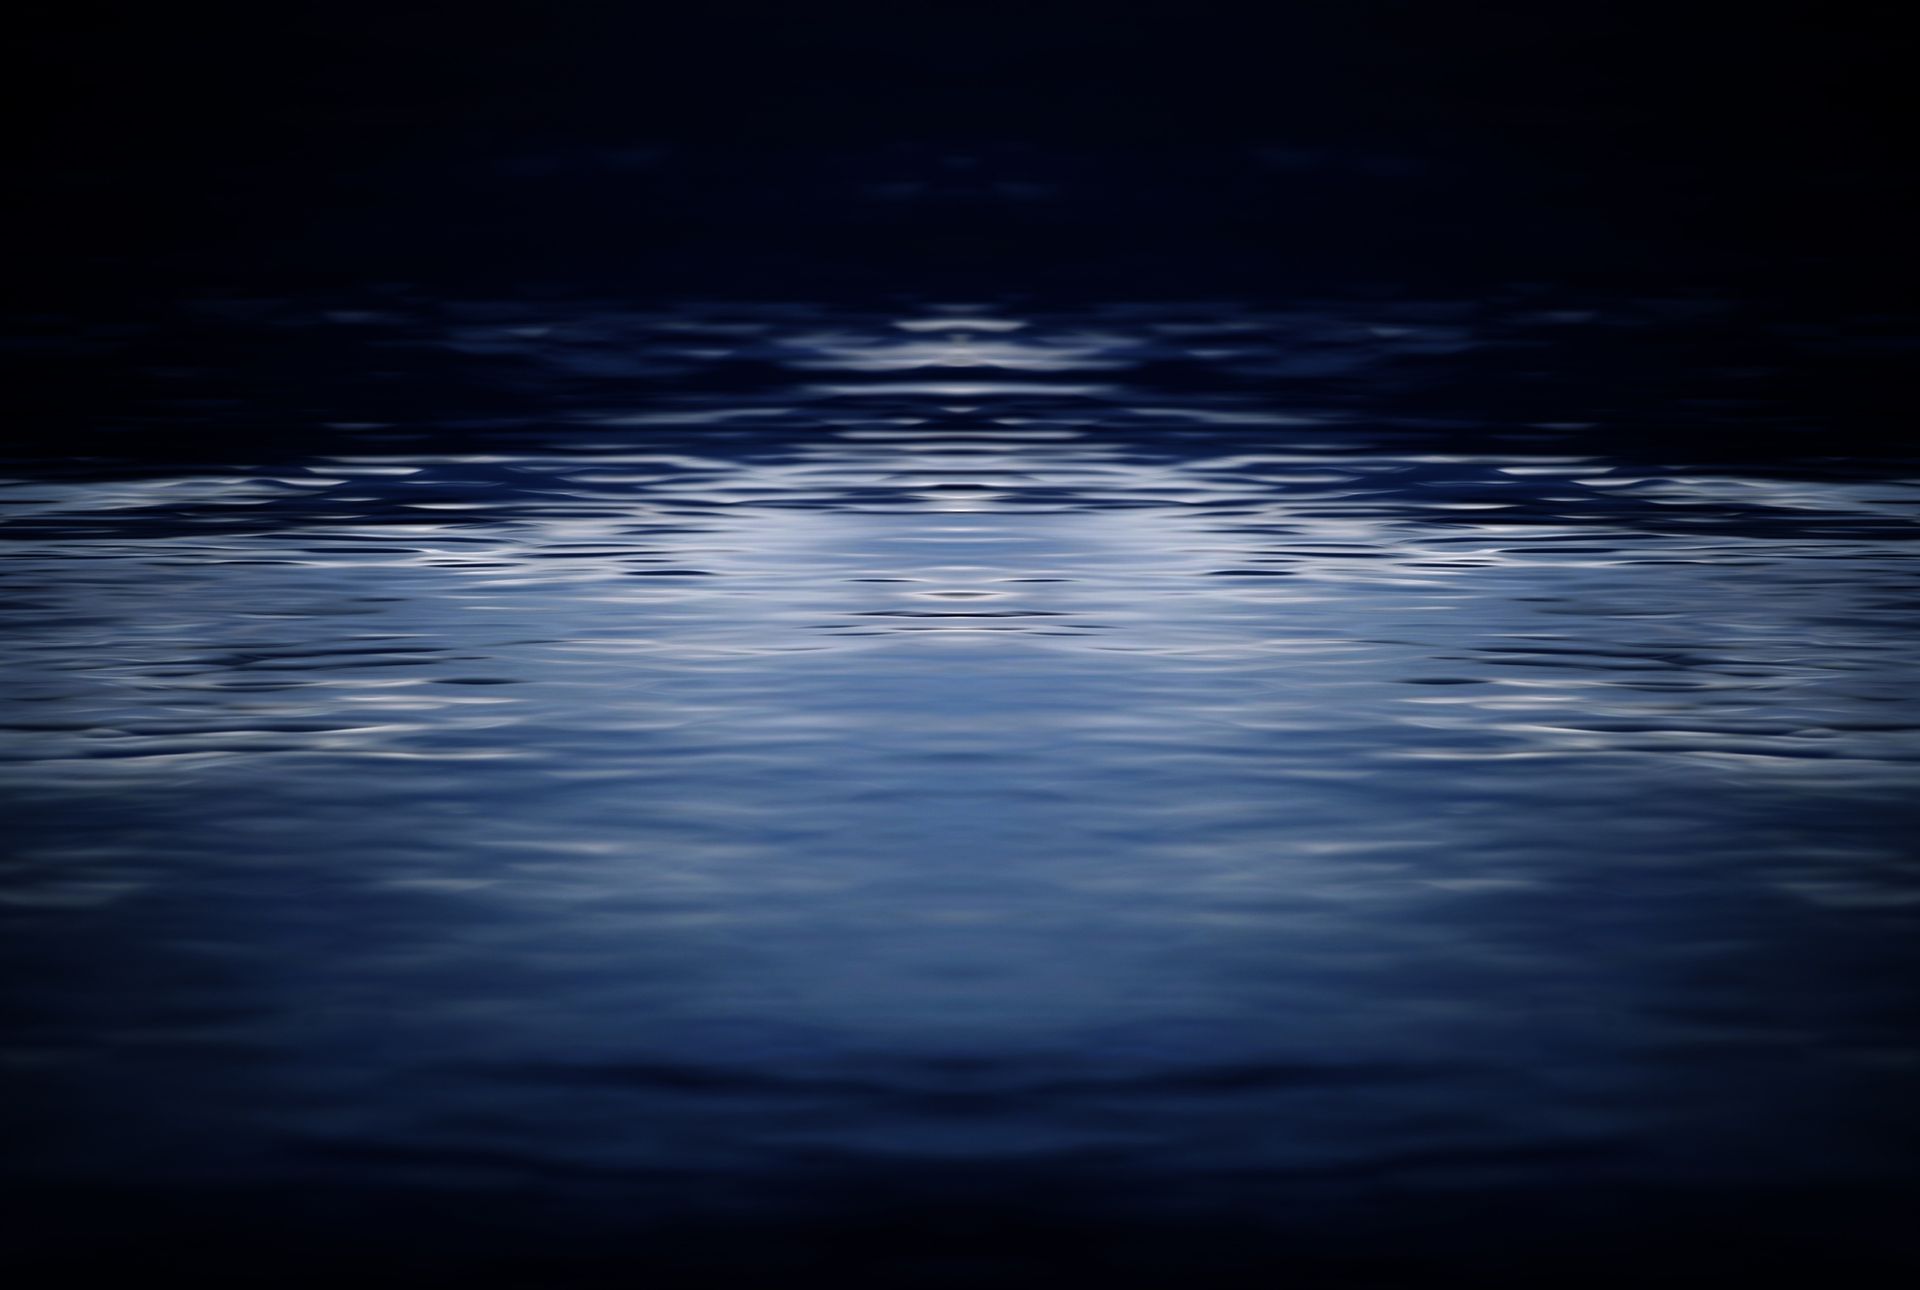 A dark room with a reflection of the moon in the water.